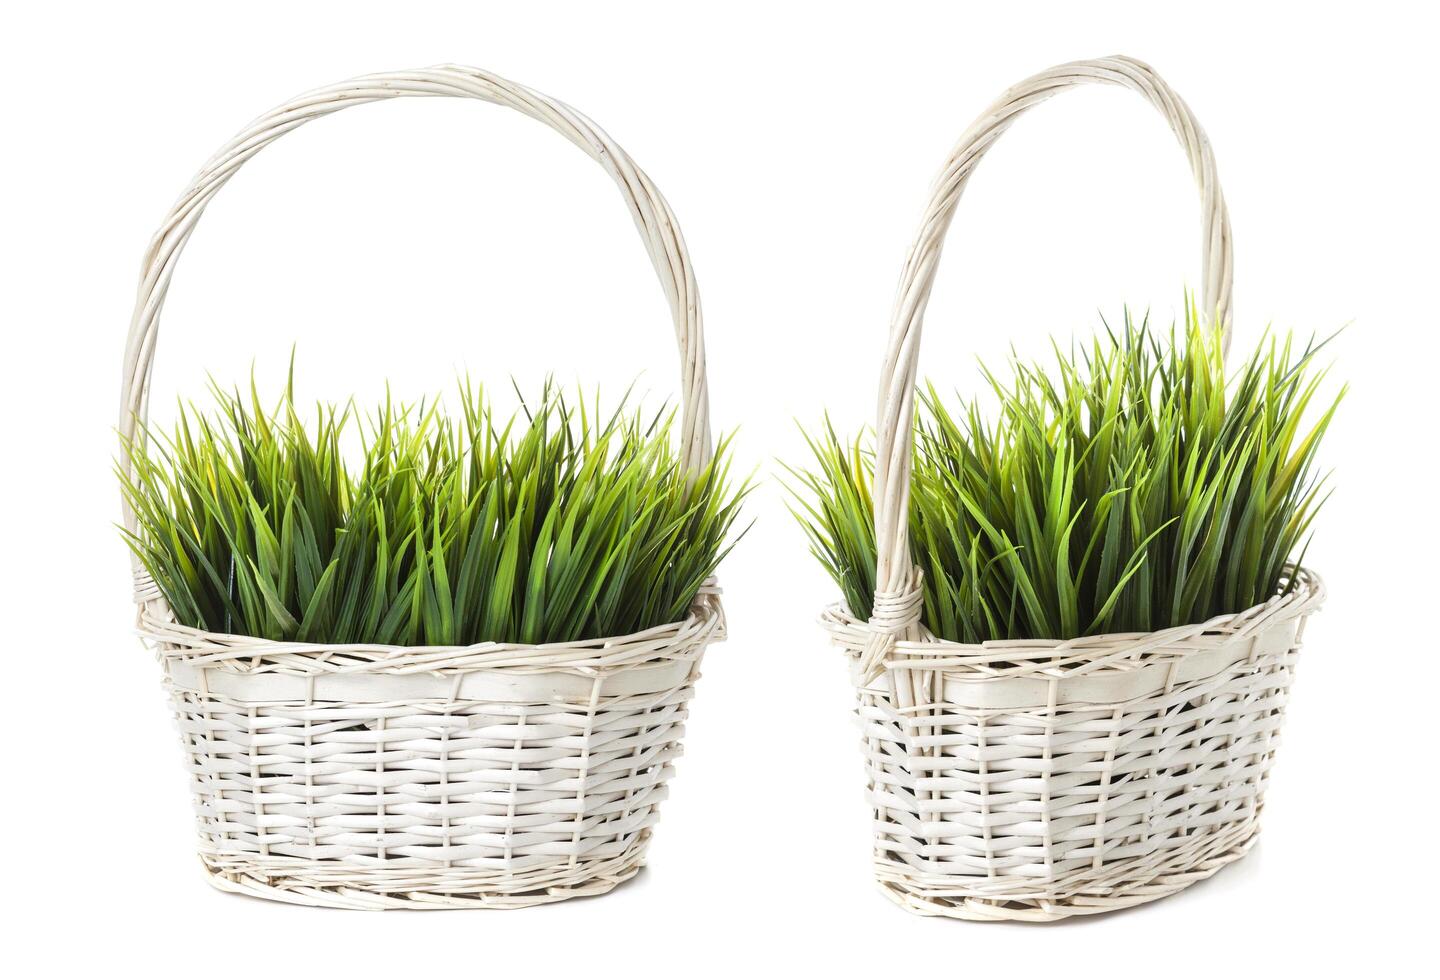 Grass in basket isolated on white background photo